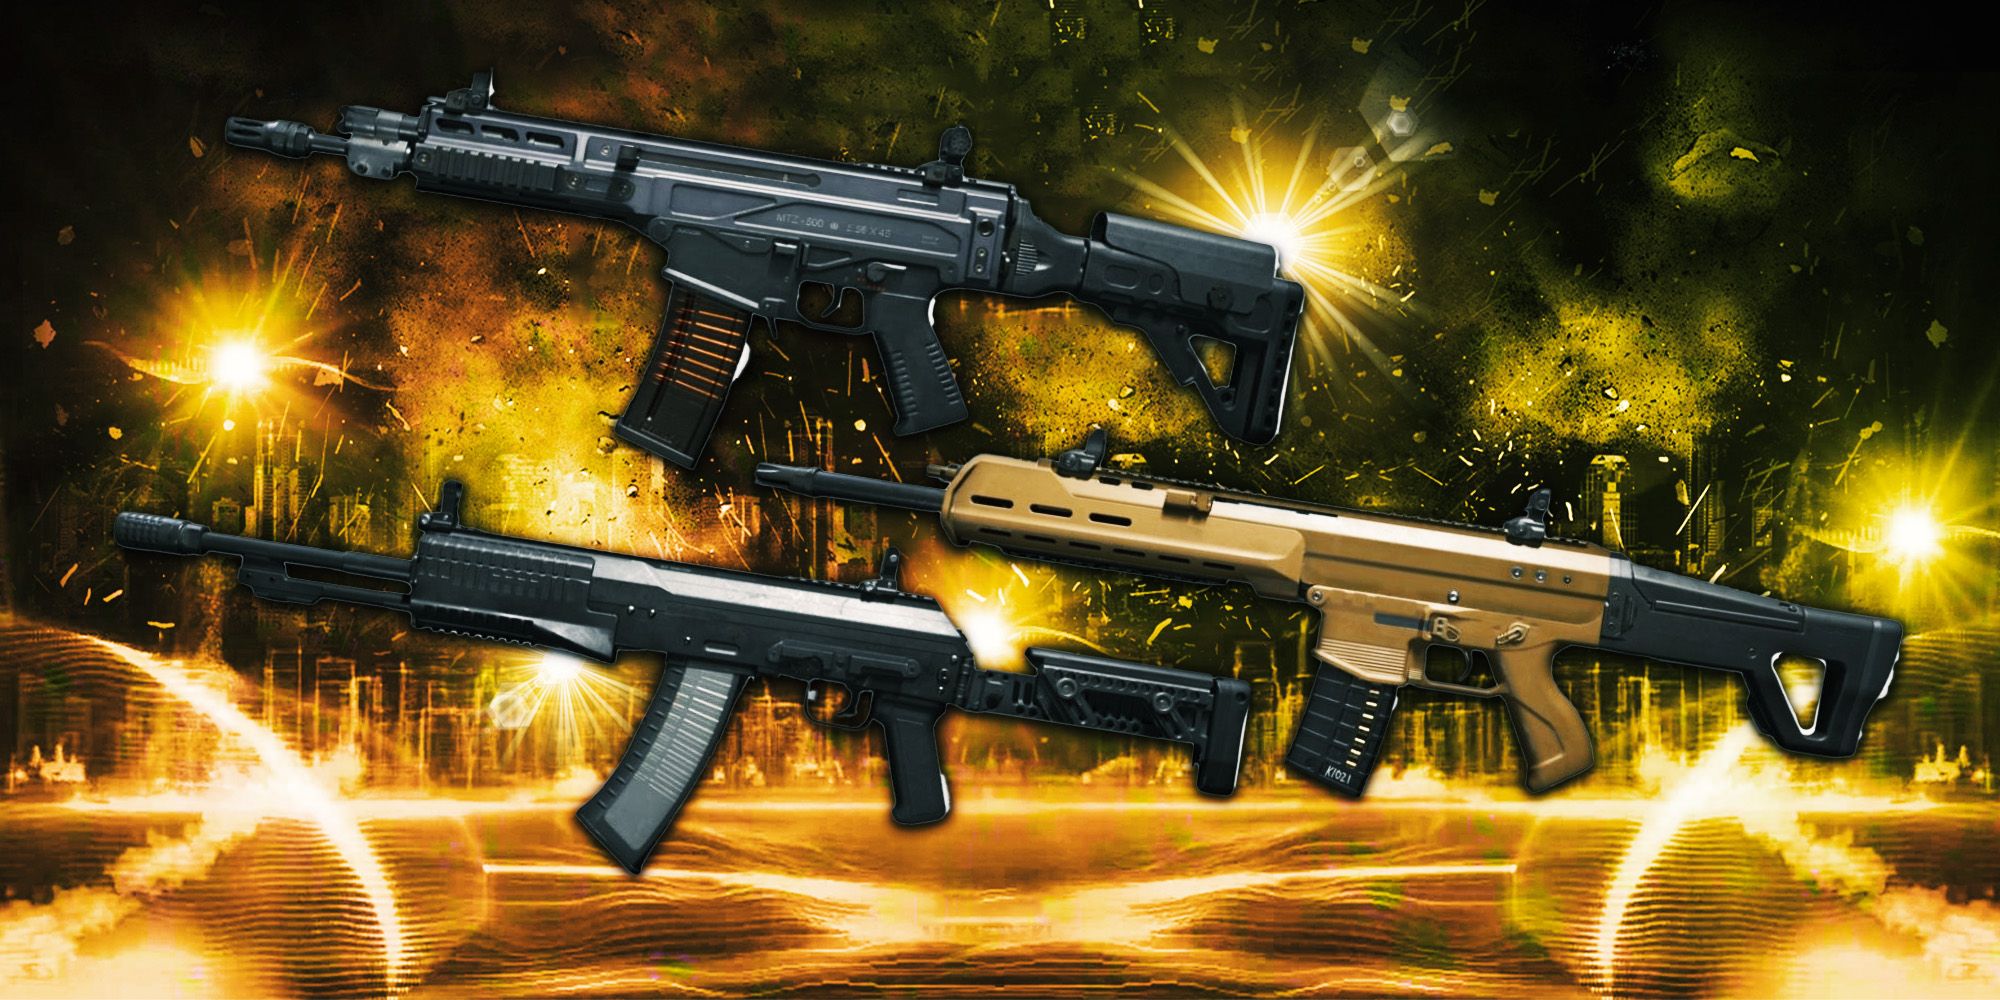 The Best Assault Rifles From Modern Warfare 3 in a Collage